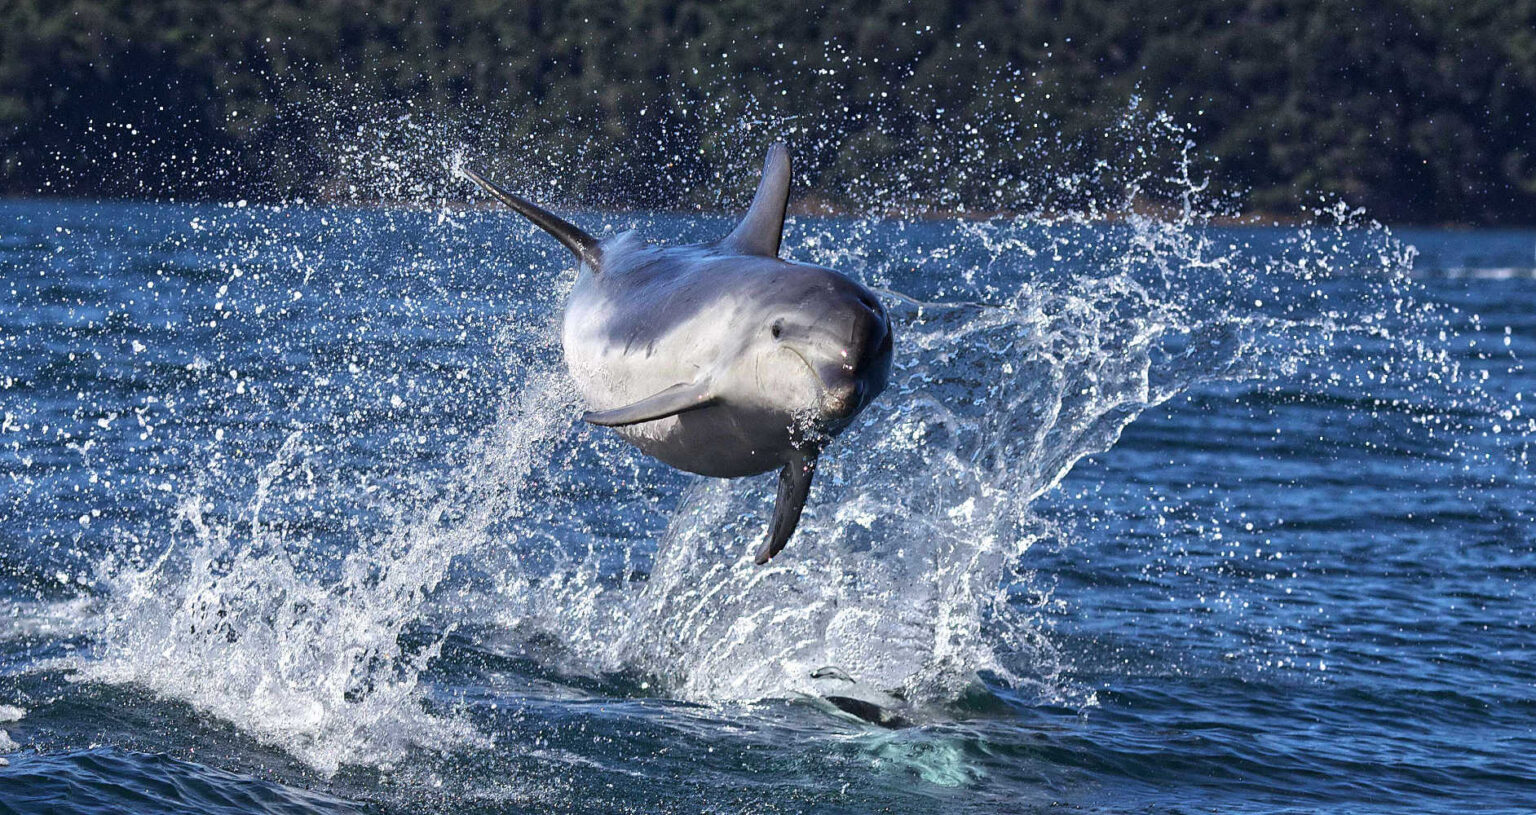 Dolphins in playful mood in Queen Charlotte Sound, South Island, New Zealand